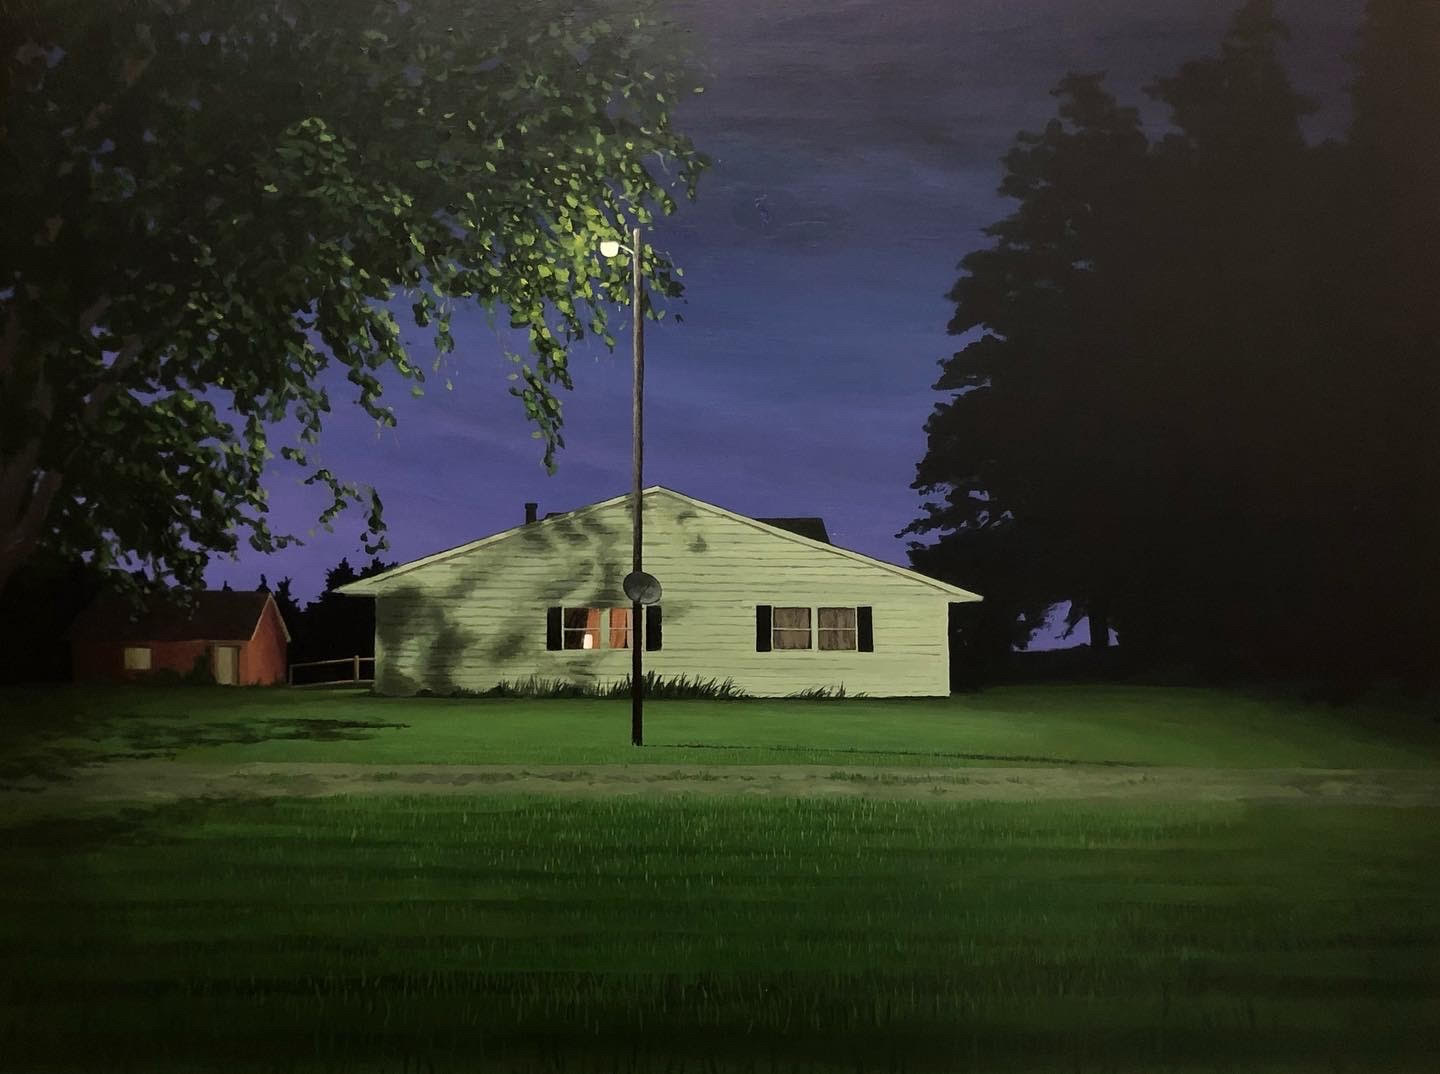 Acrylic painting of a white house at night lit by a street lamp.